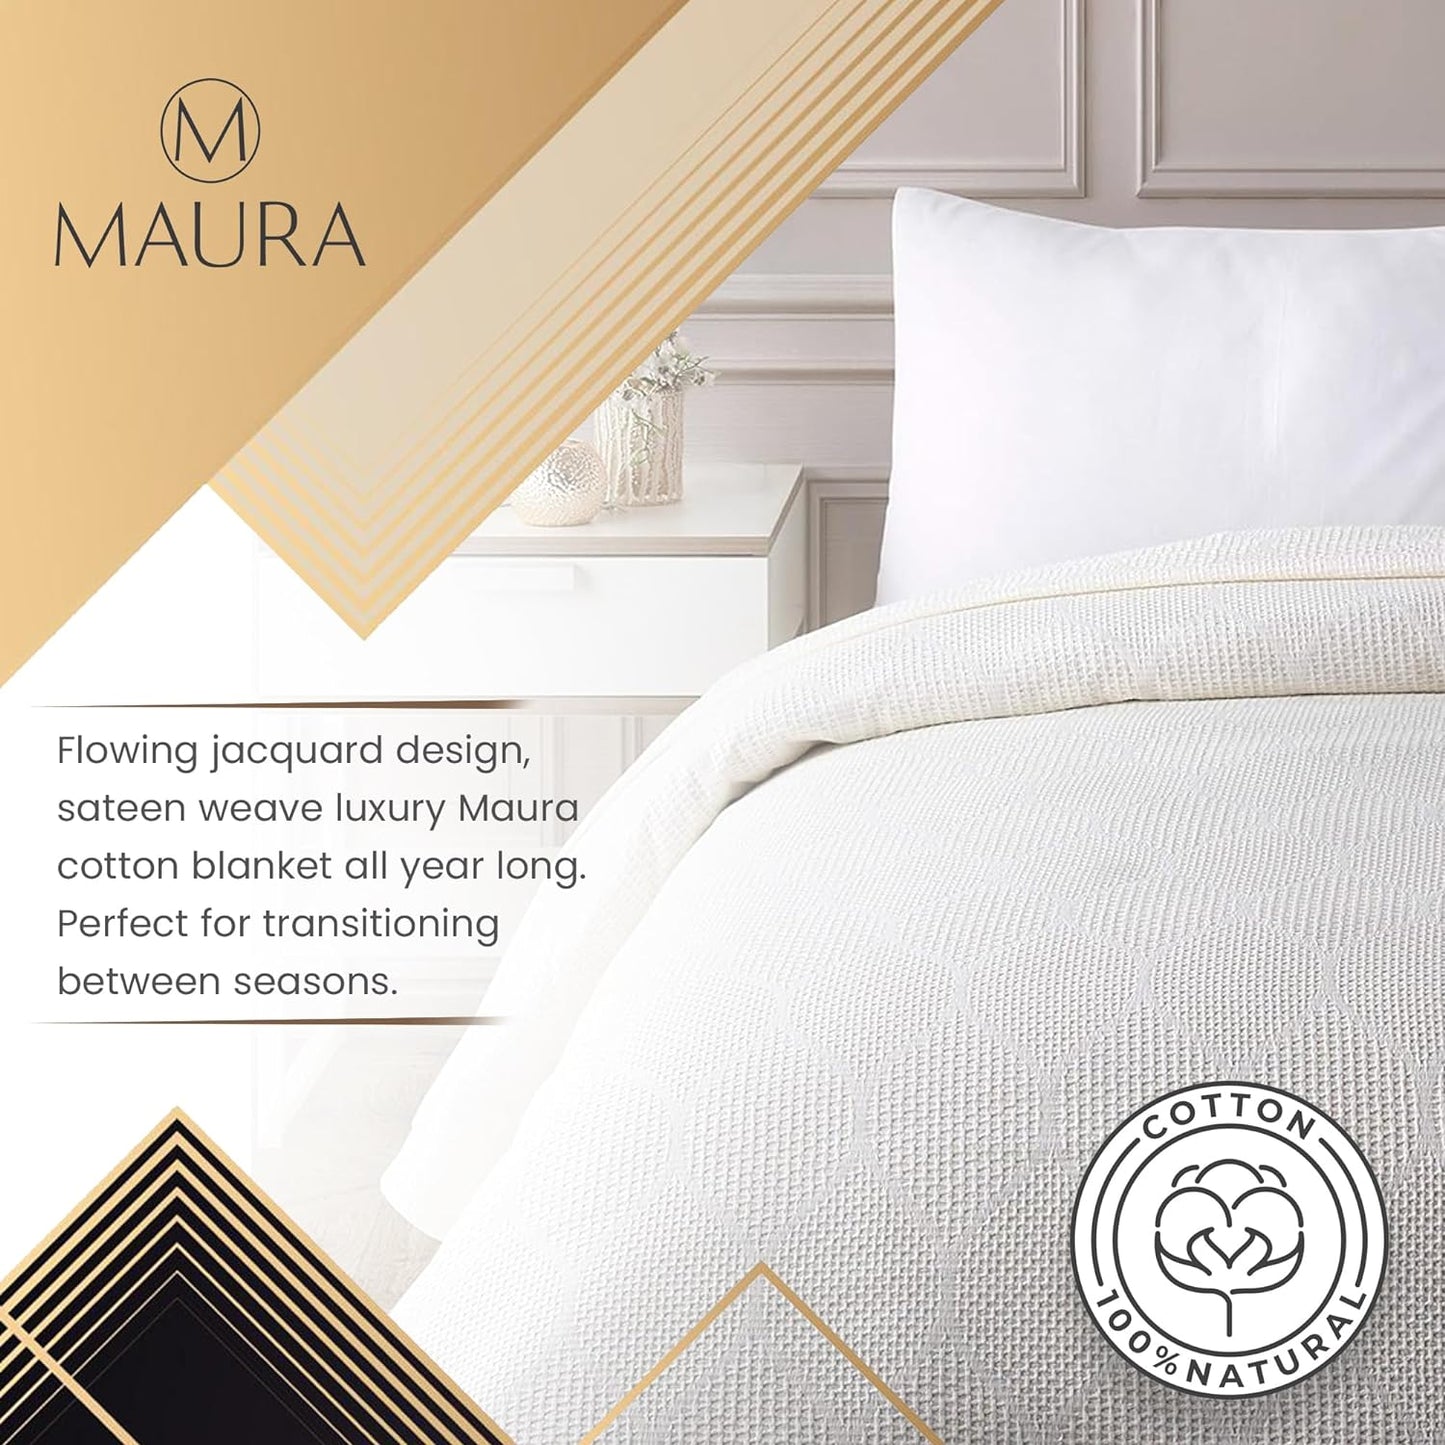 Thin Lightweight Cotton Blankets Skin-Friendly, Breathable, and Fade-Resistant - Modern Bedding Essentials for Year-Round Comfort, Style, and Quality Sleep Experience. King Large 108”X 90”-Ivory